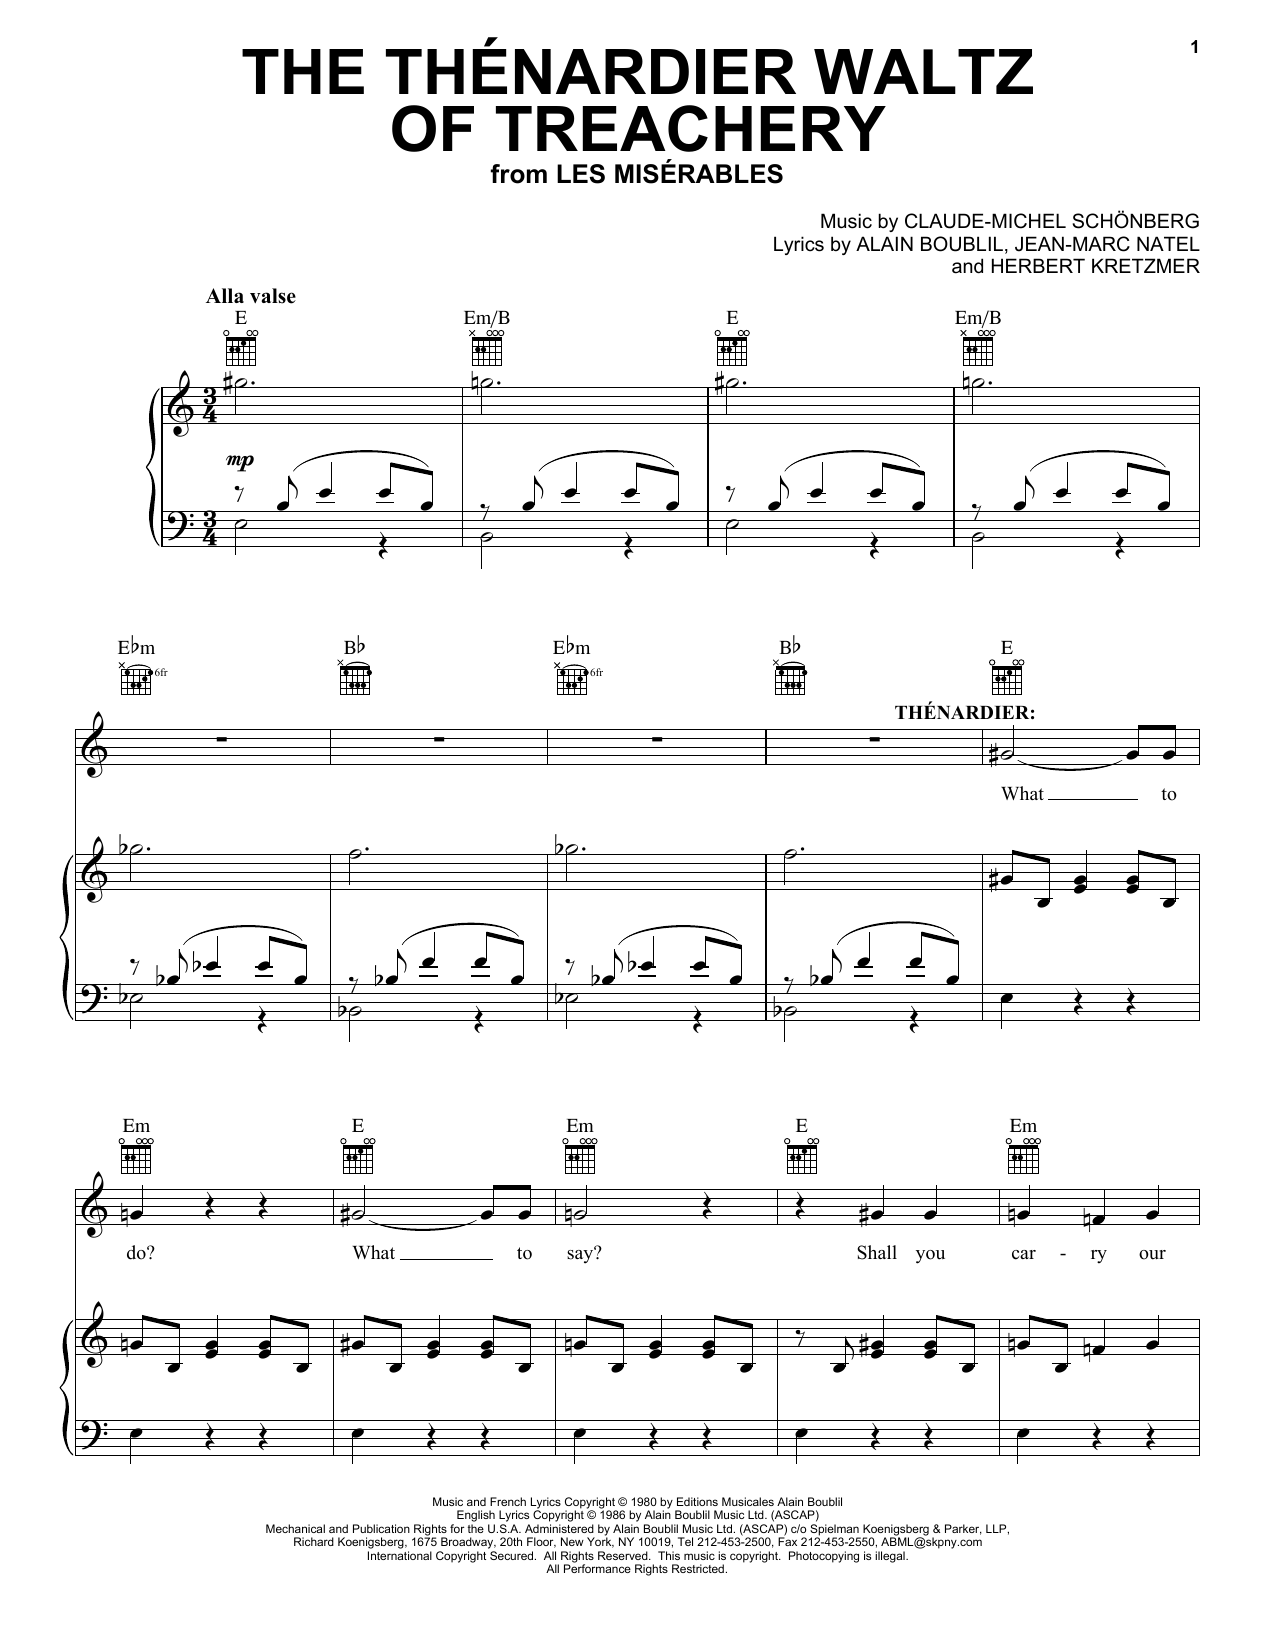 Boublil and Schonberg The Thénardier Waltz Of Treachery (from Les Miserables) sheet music notes and chords. Download Printable PDF.